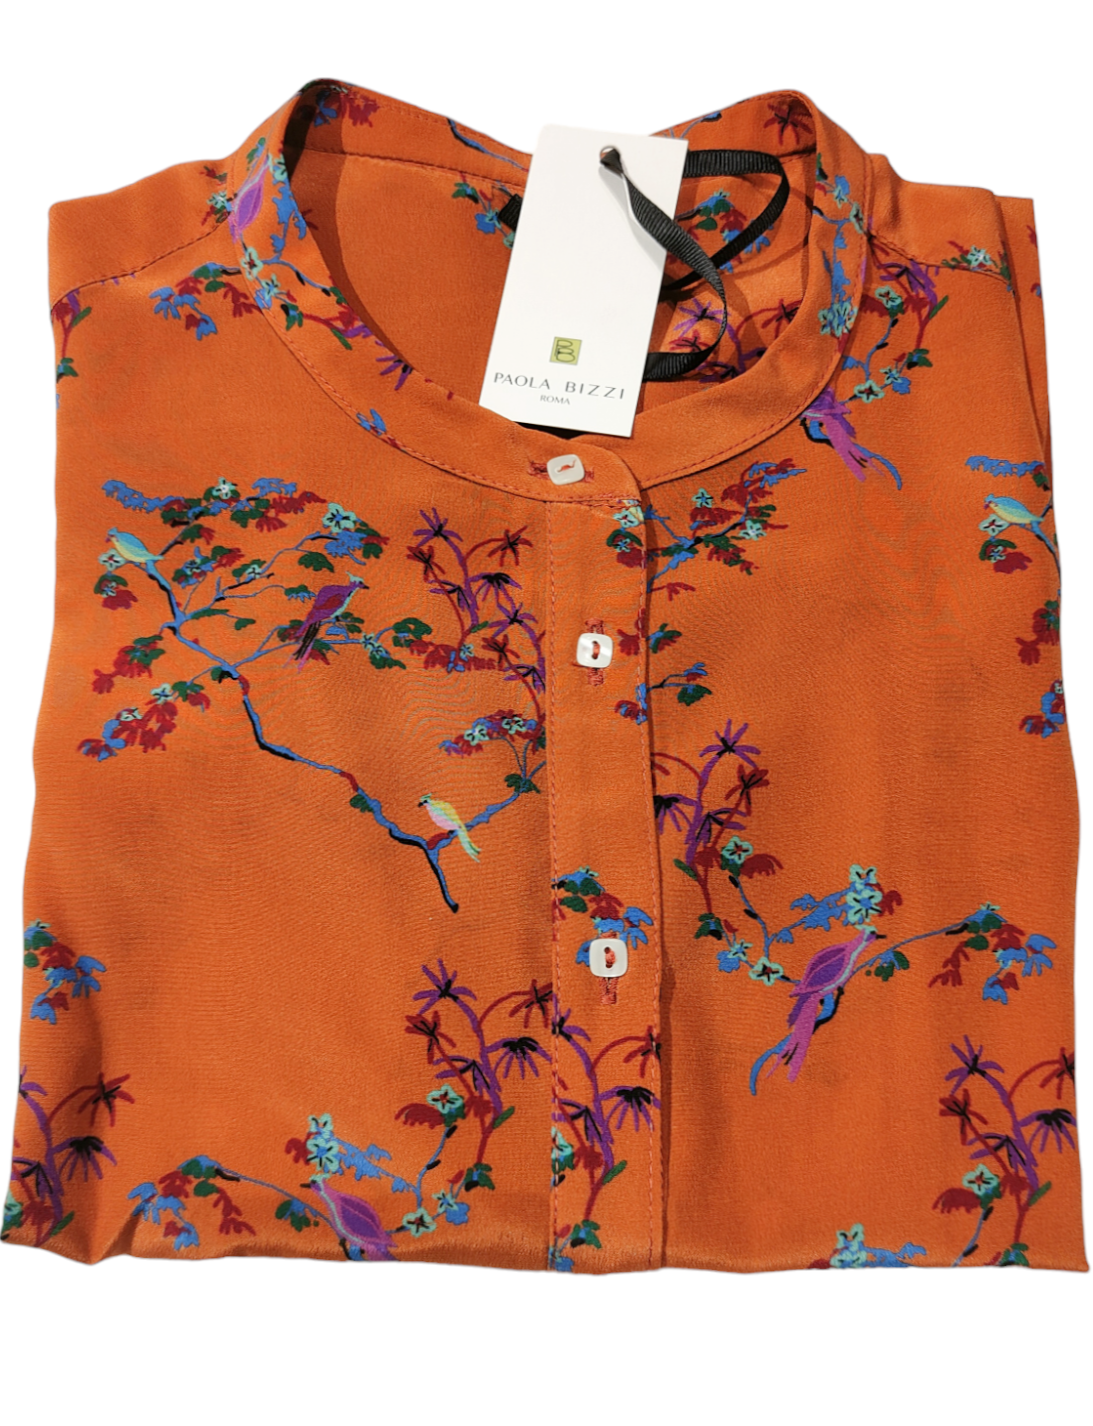 "Unique" silk shirt with "Cineserie" pattern with orange background